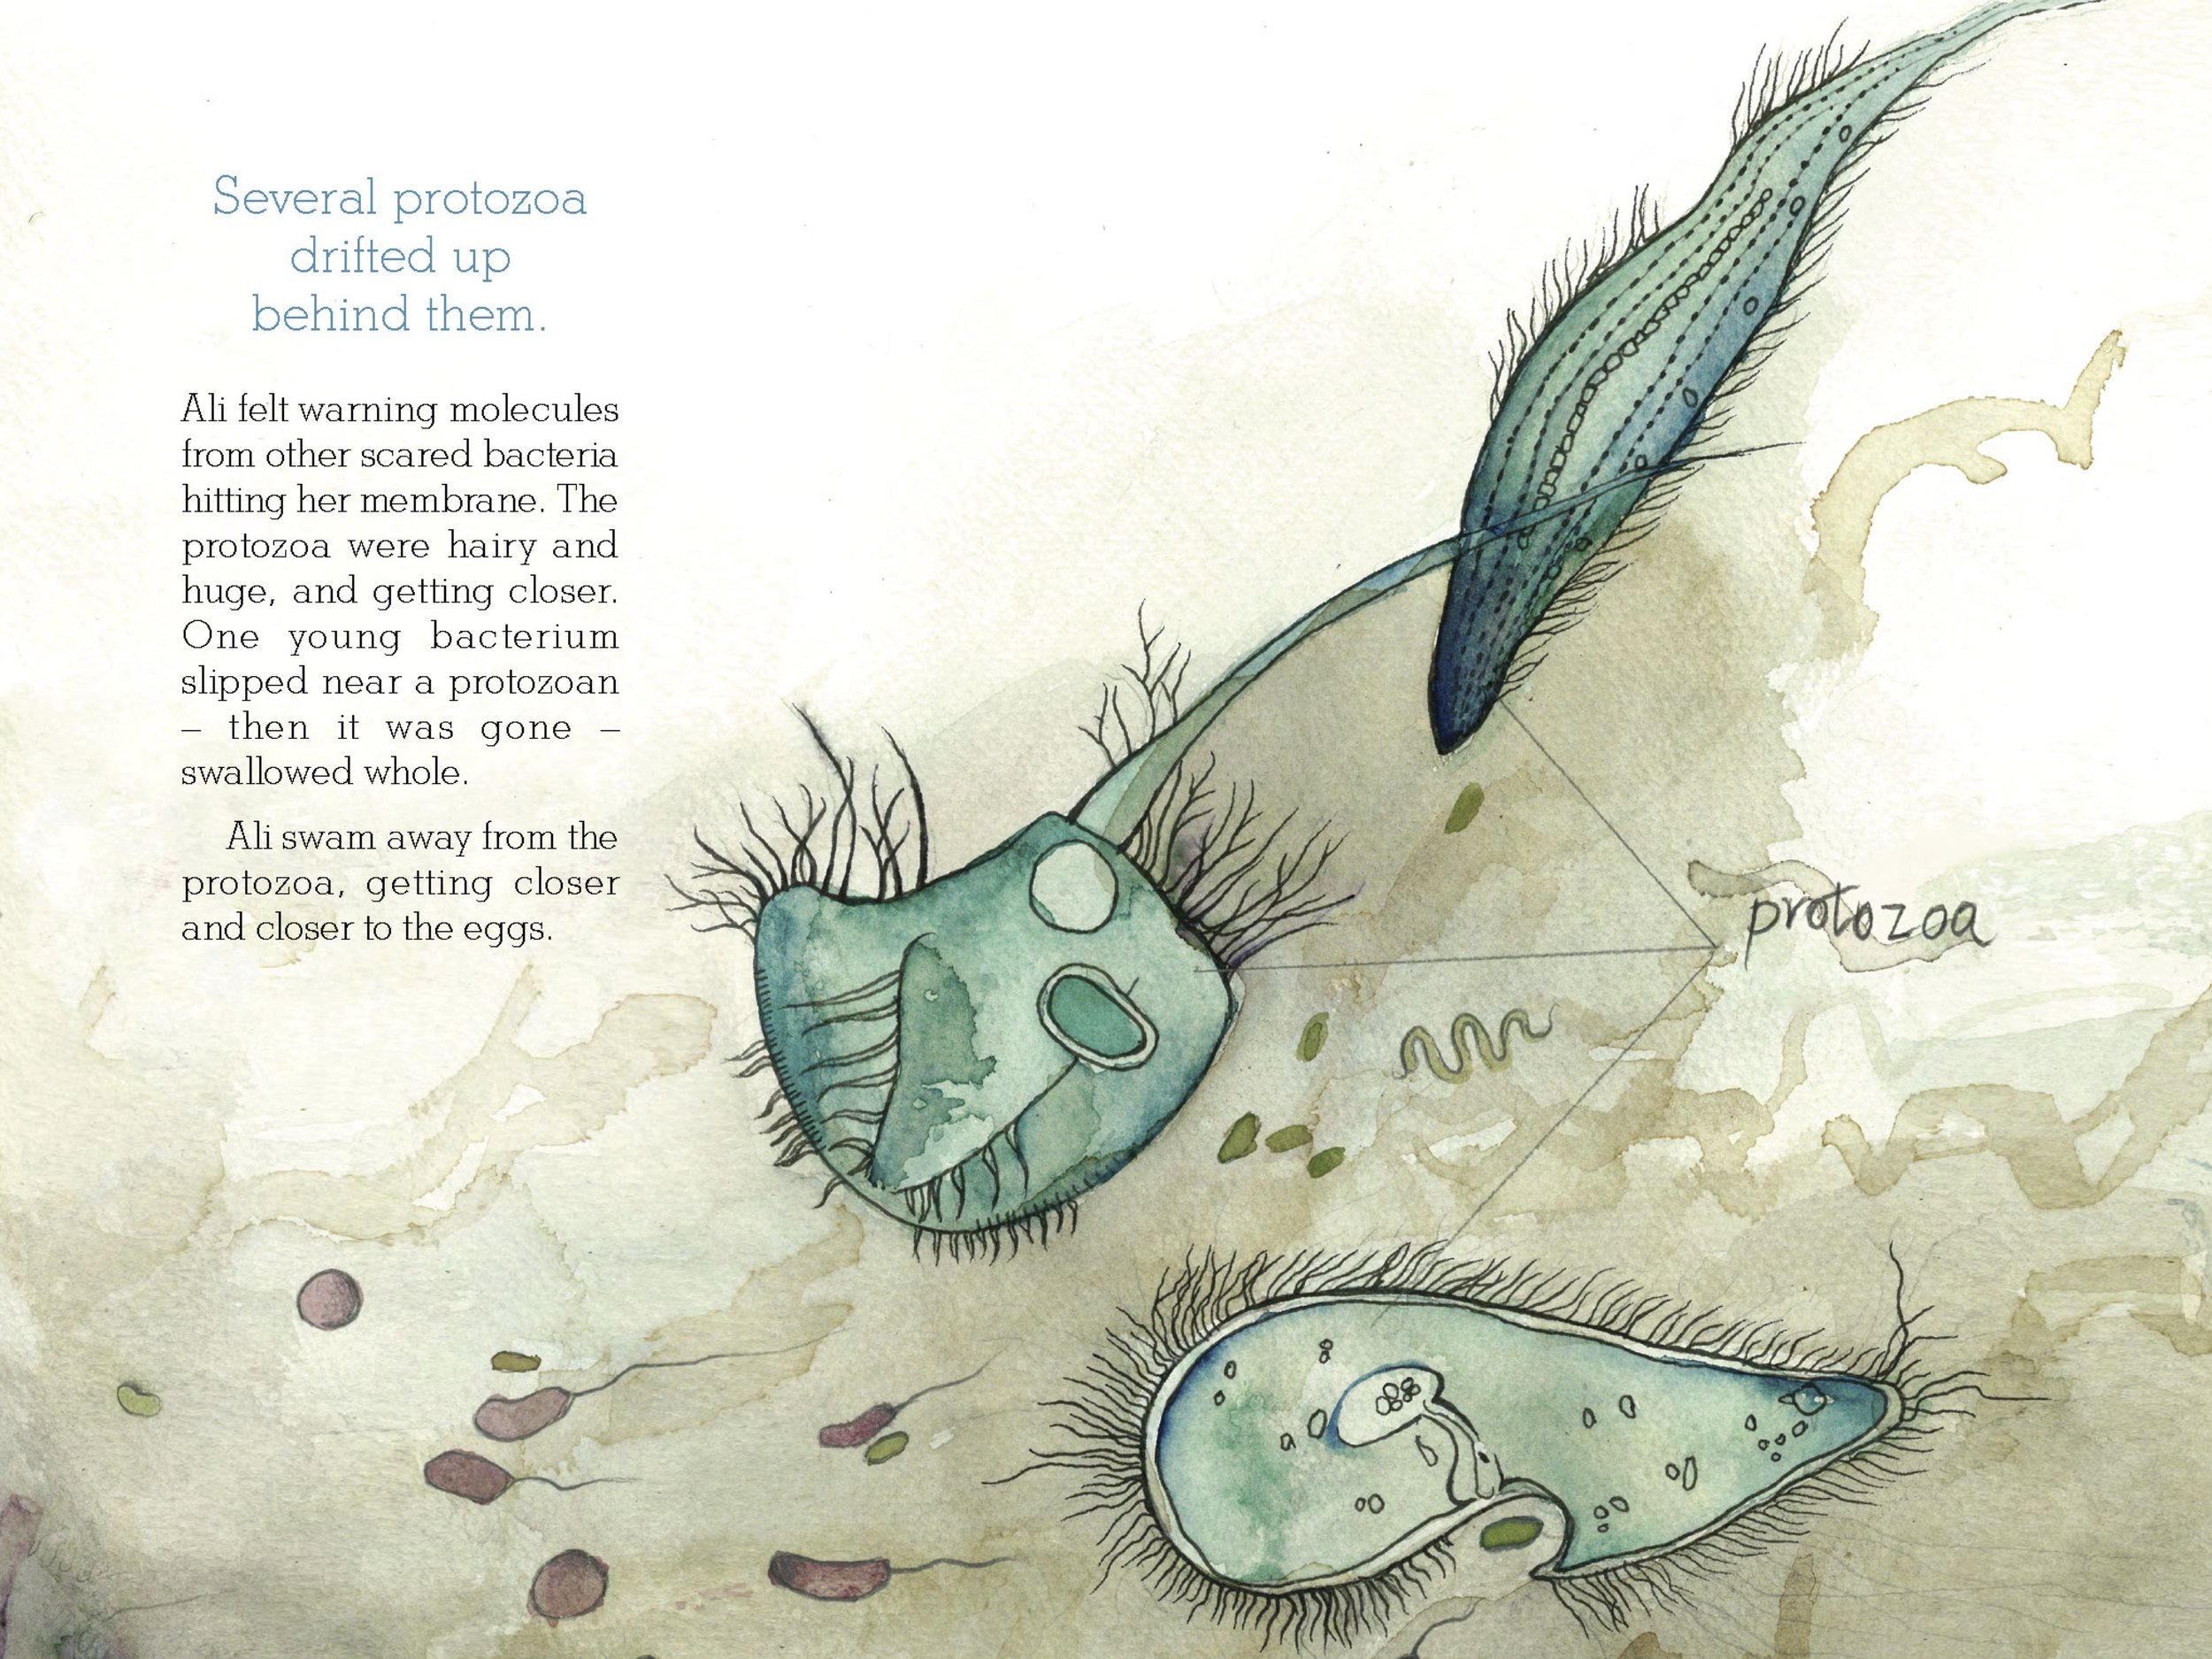 Copy of Selected page from The Squid, the Vibrio & the Moon. Written by Ailsa Wild, Illustrated by Aviva Reed and Created by Dr. Gregory Crocetti. Published by Scale Free Network, 2014.